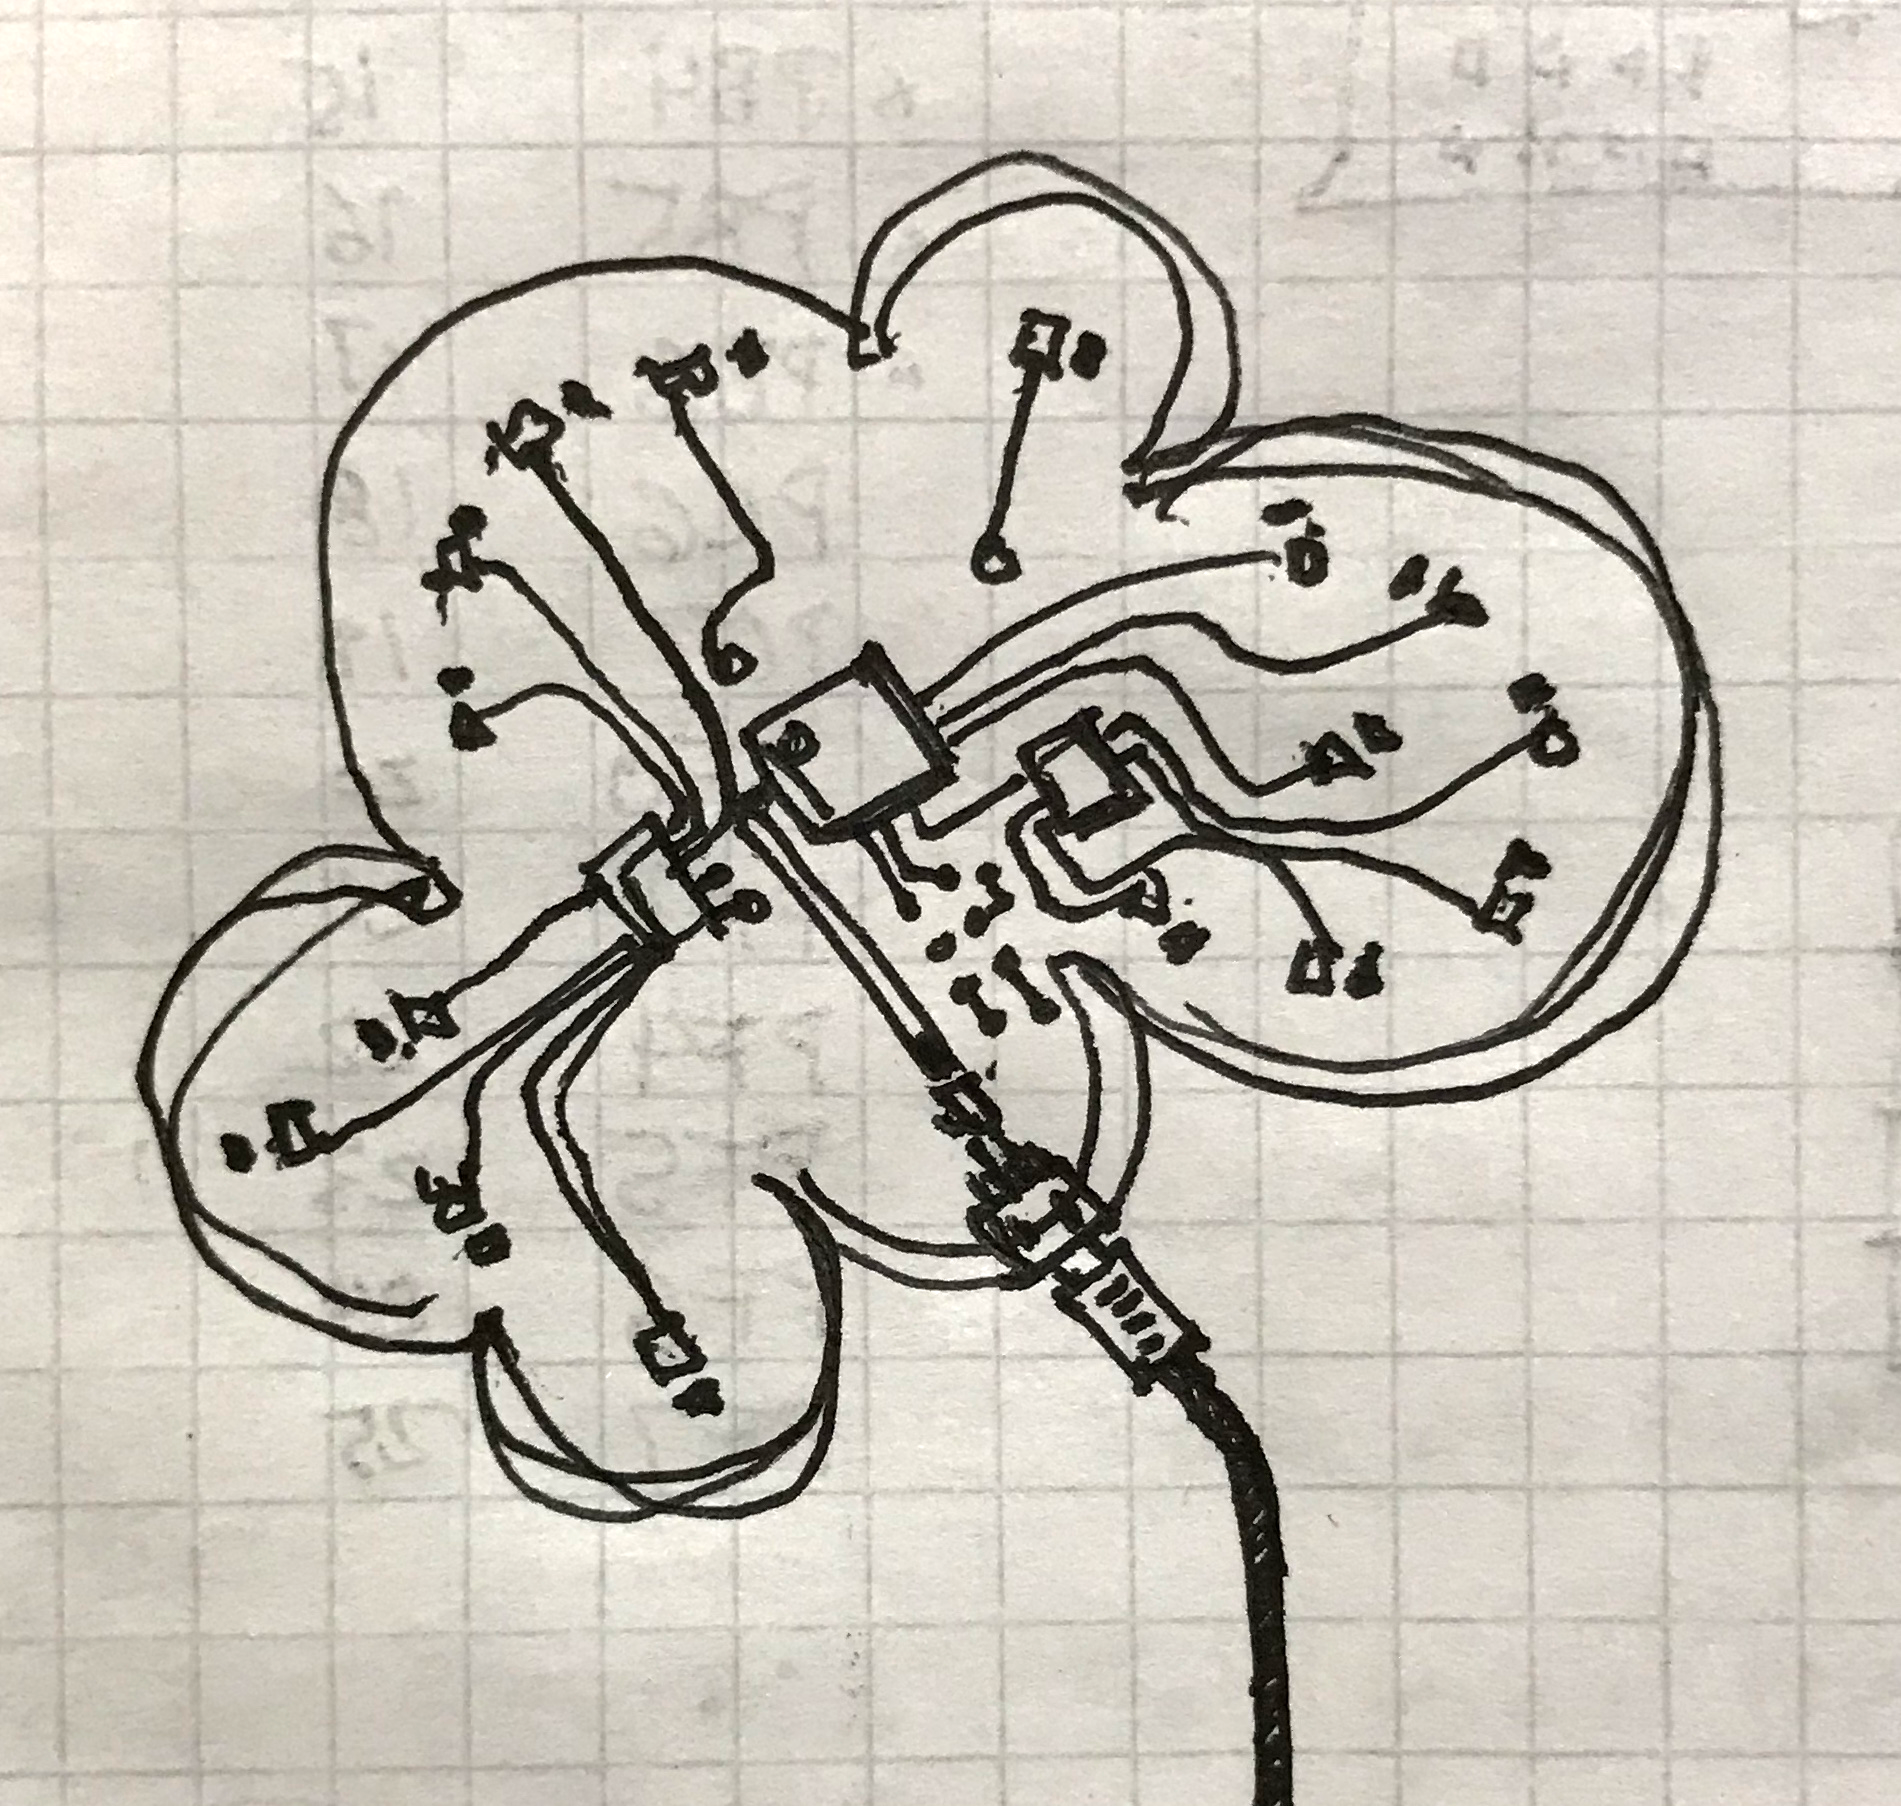 A sketch of a tiny cloud with circuitry inside